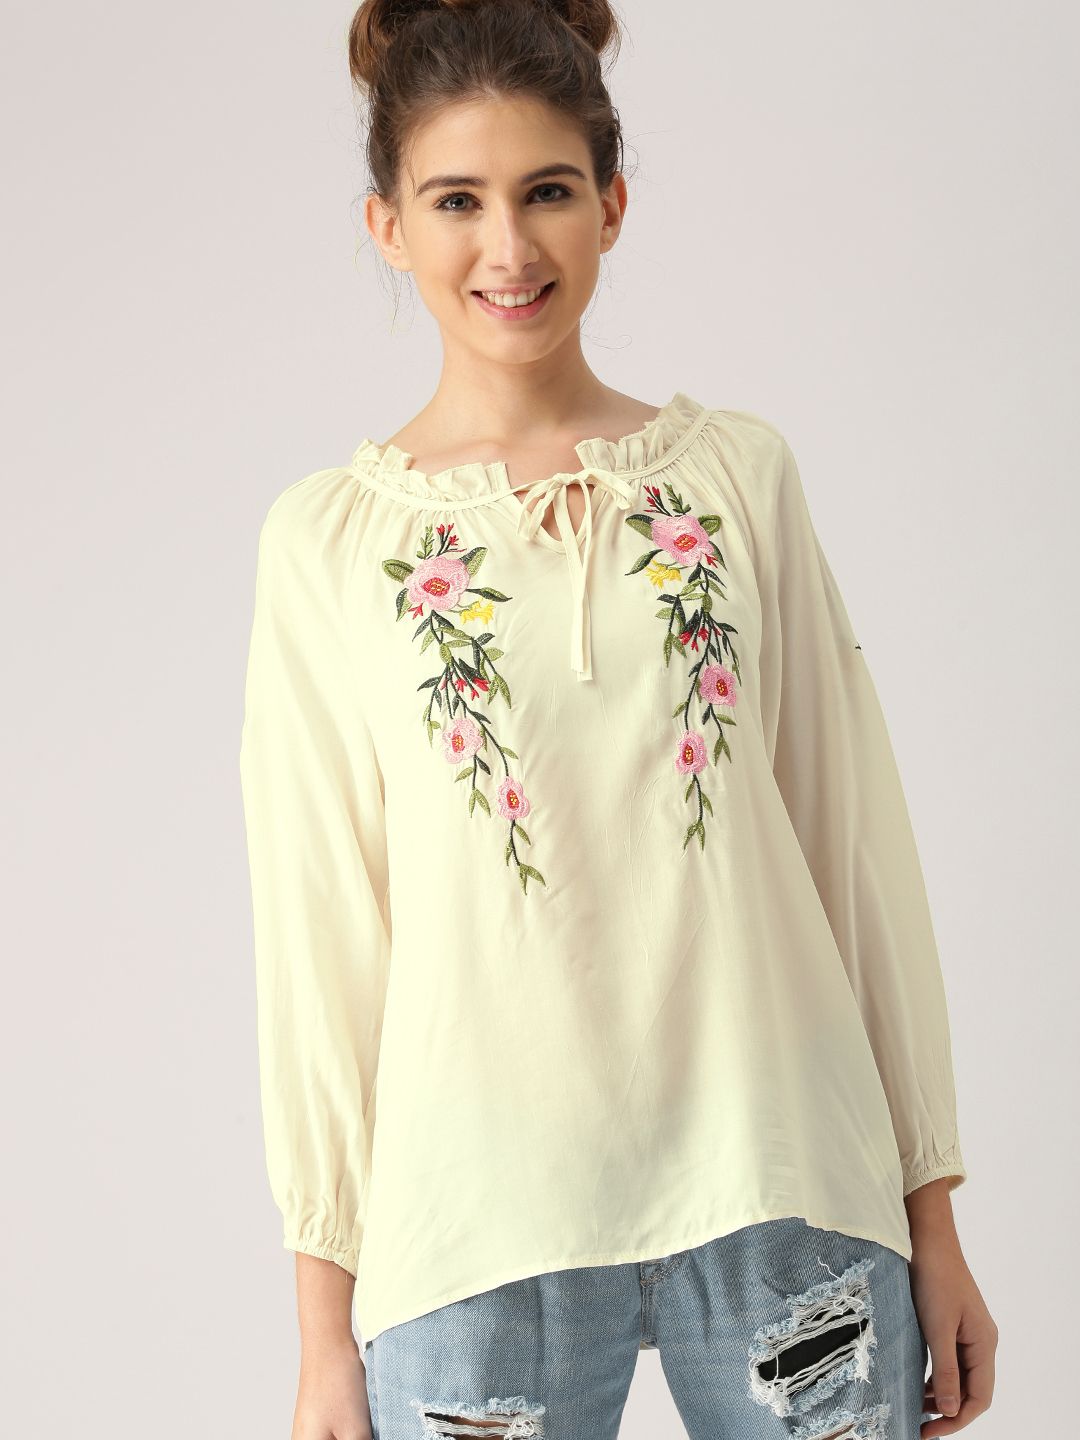 Buy DressBerry DressBerry Women Off-White Self Design Top at Redfynd